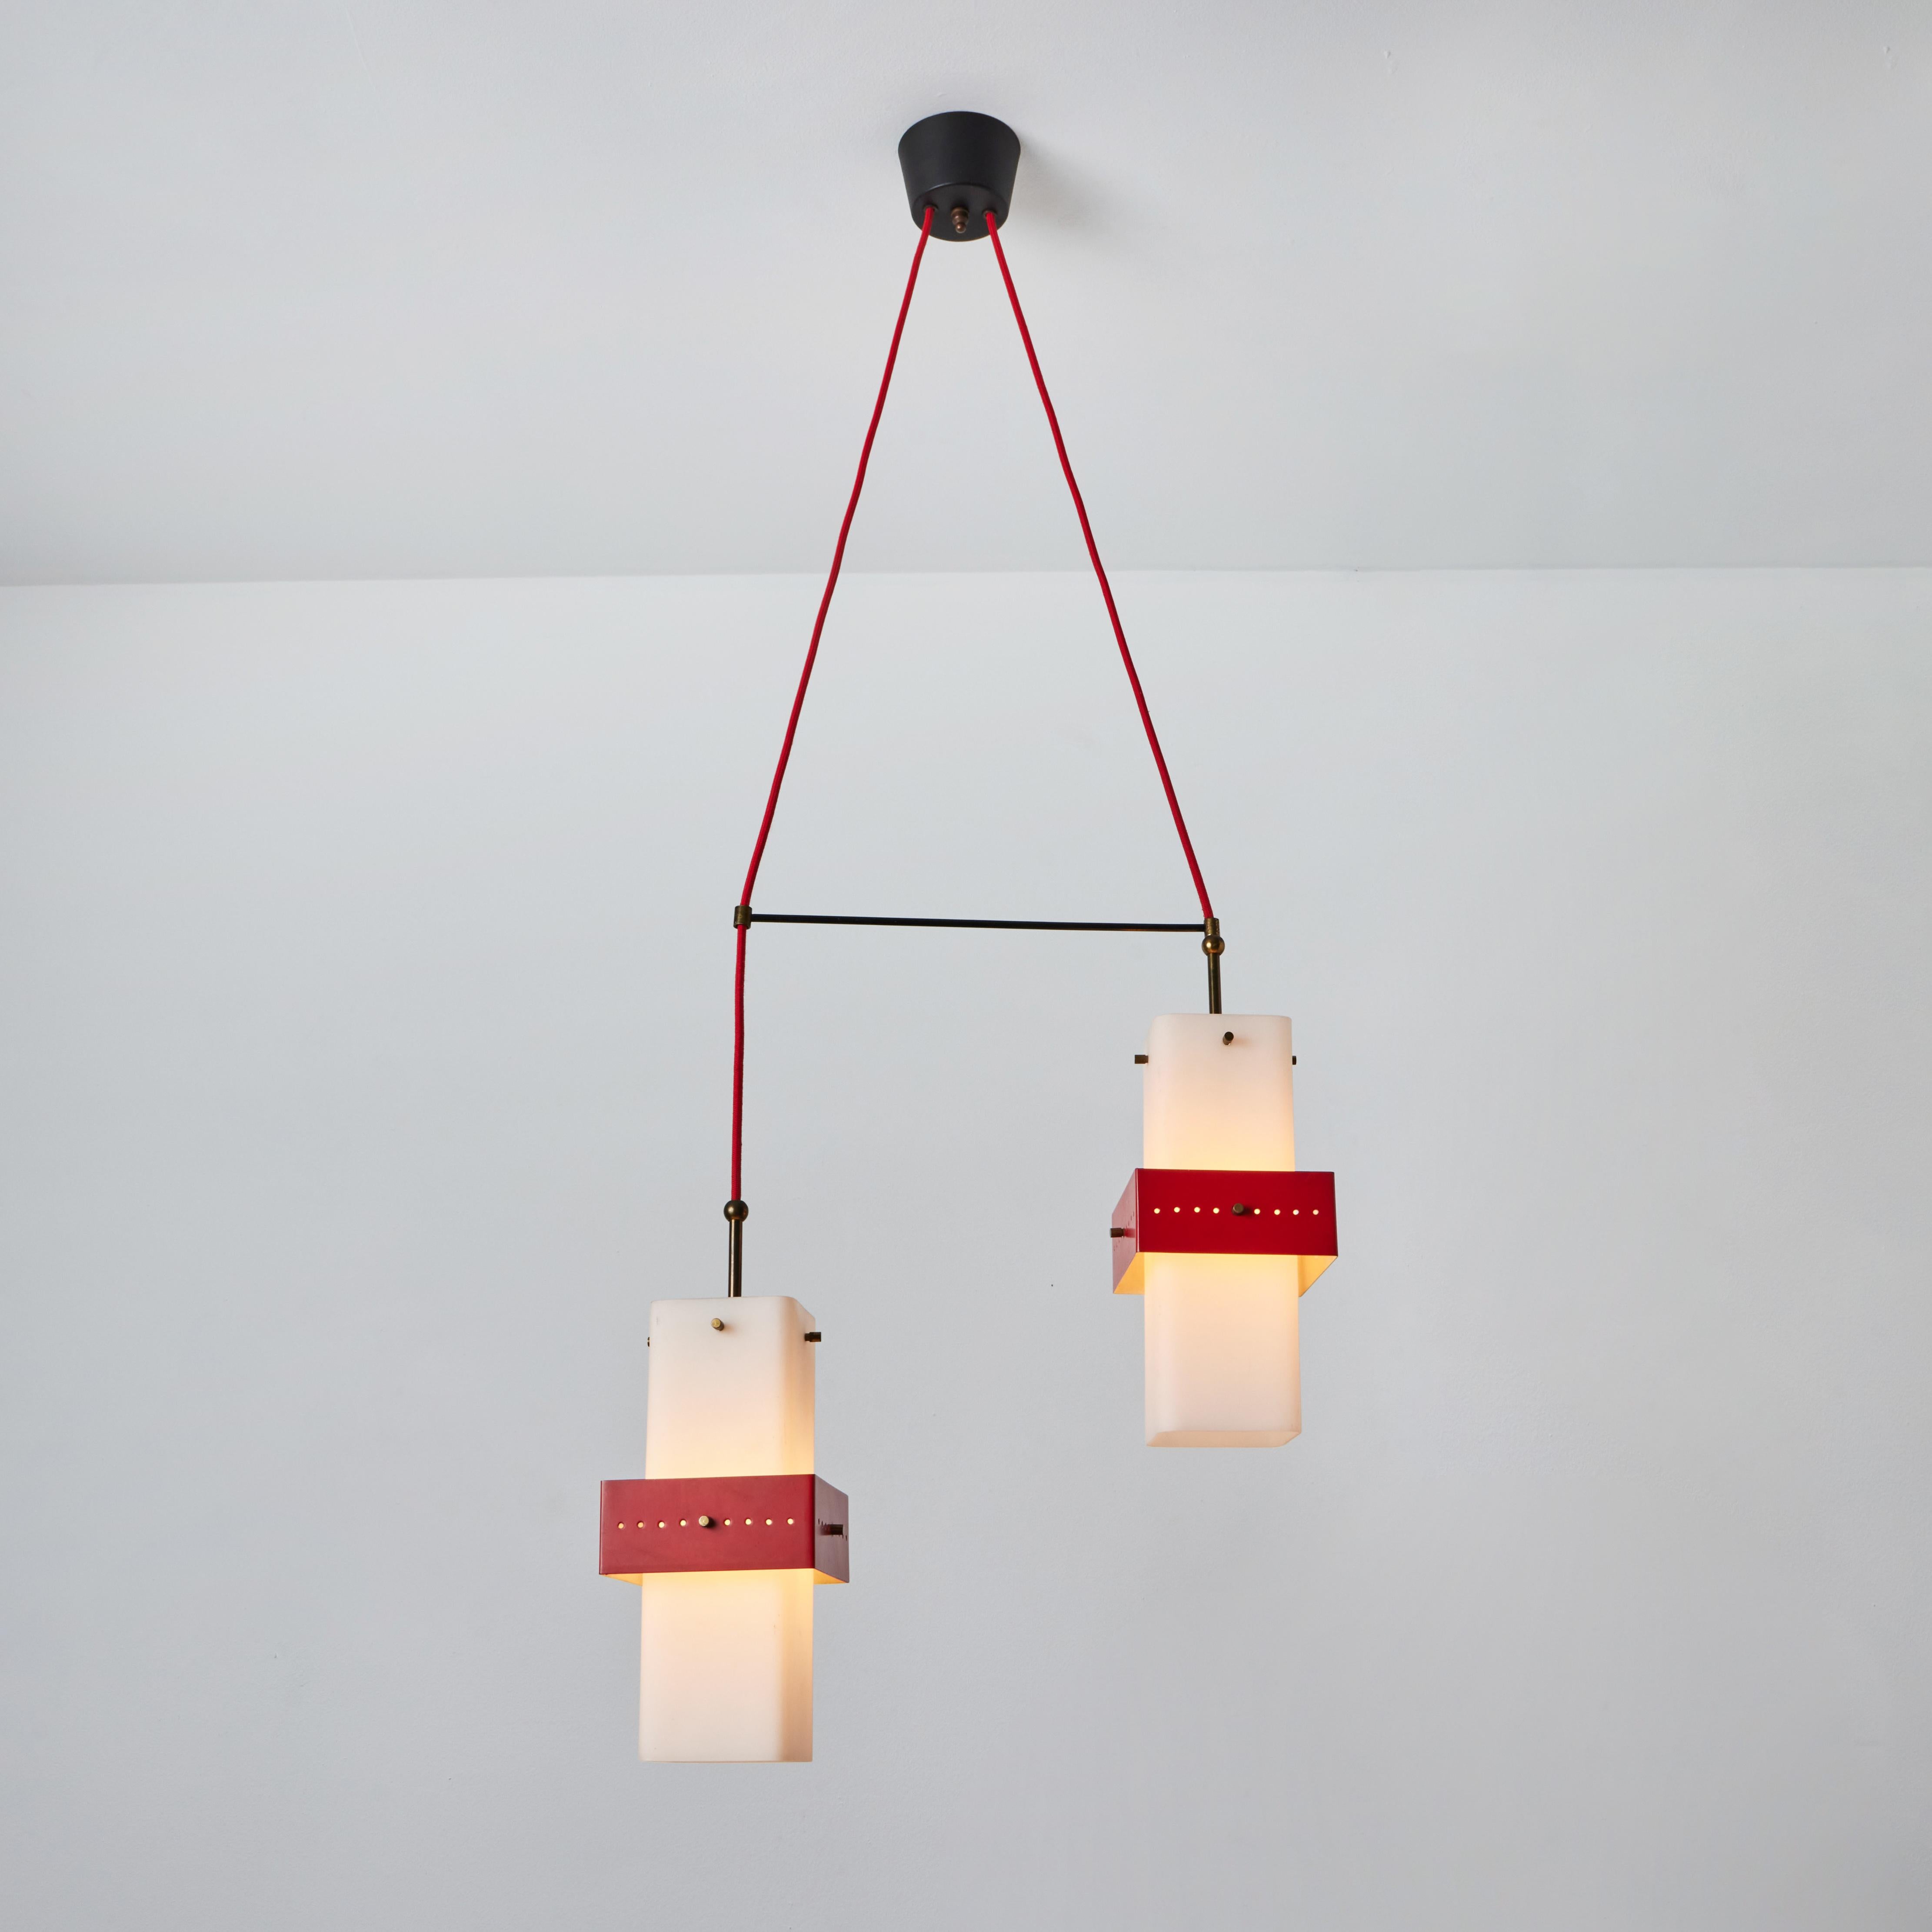 1950s Stilnovo red metal & opaline glass suspension lamp. A quintessentially 1950s Italian design executed in sculptural opaline glass, red painted metal, and brass hardware. A highly functional and refined suspension light of attractive scale and